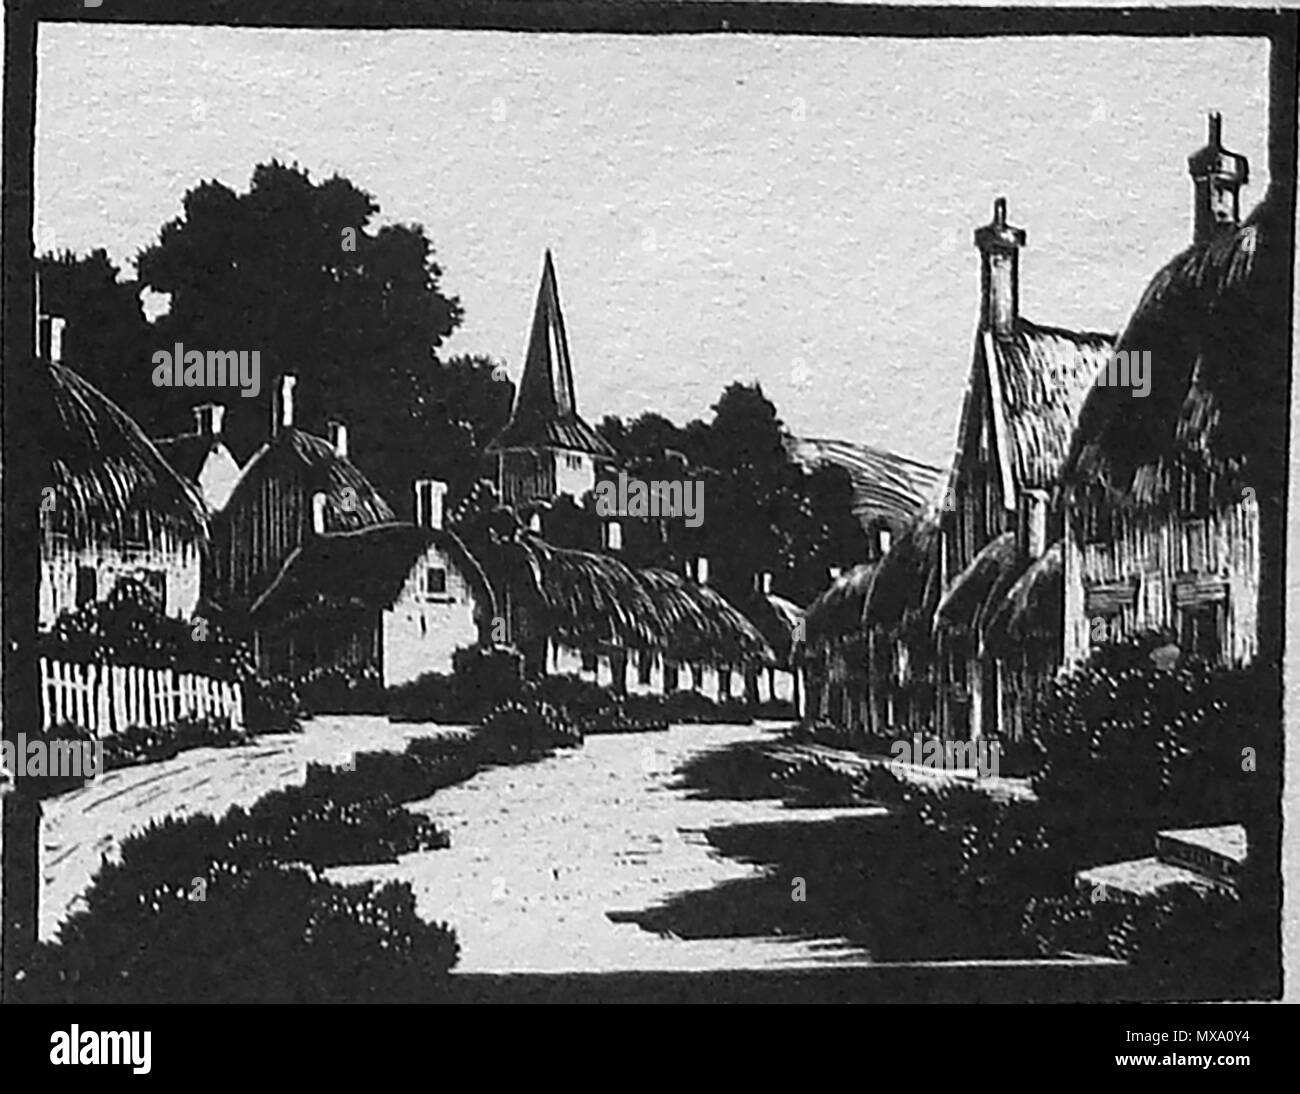 1930 wood-cut (wood block or lino-cut) hand engraved picture of an English country village with thatched cottages Stock Photo